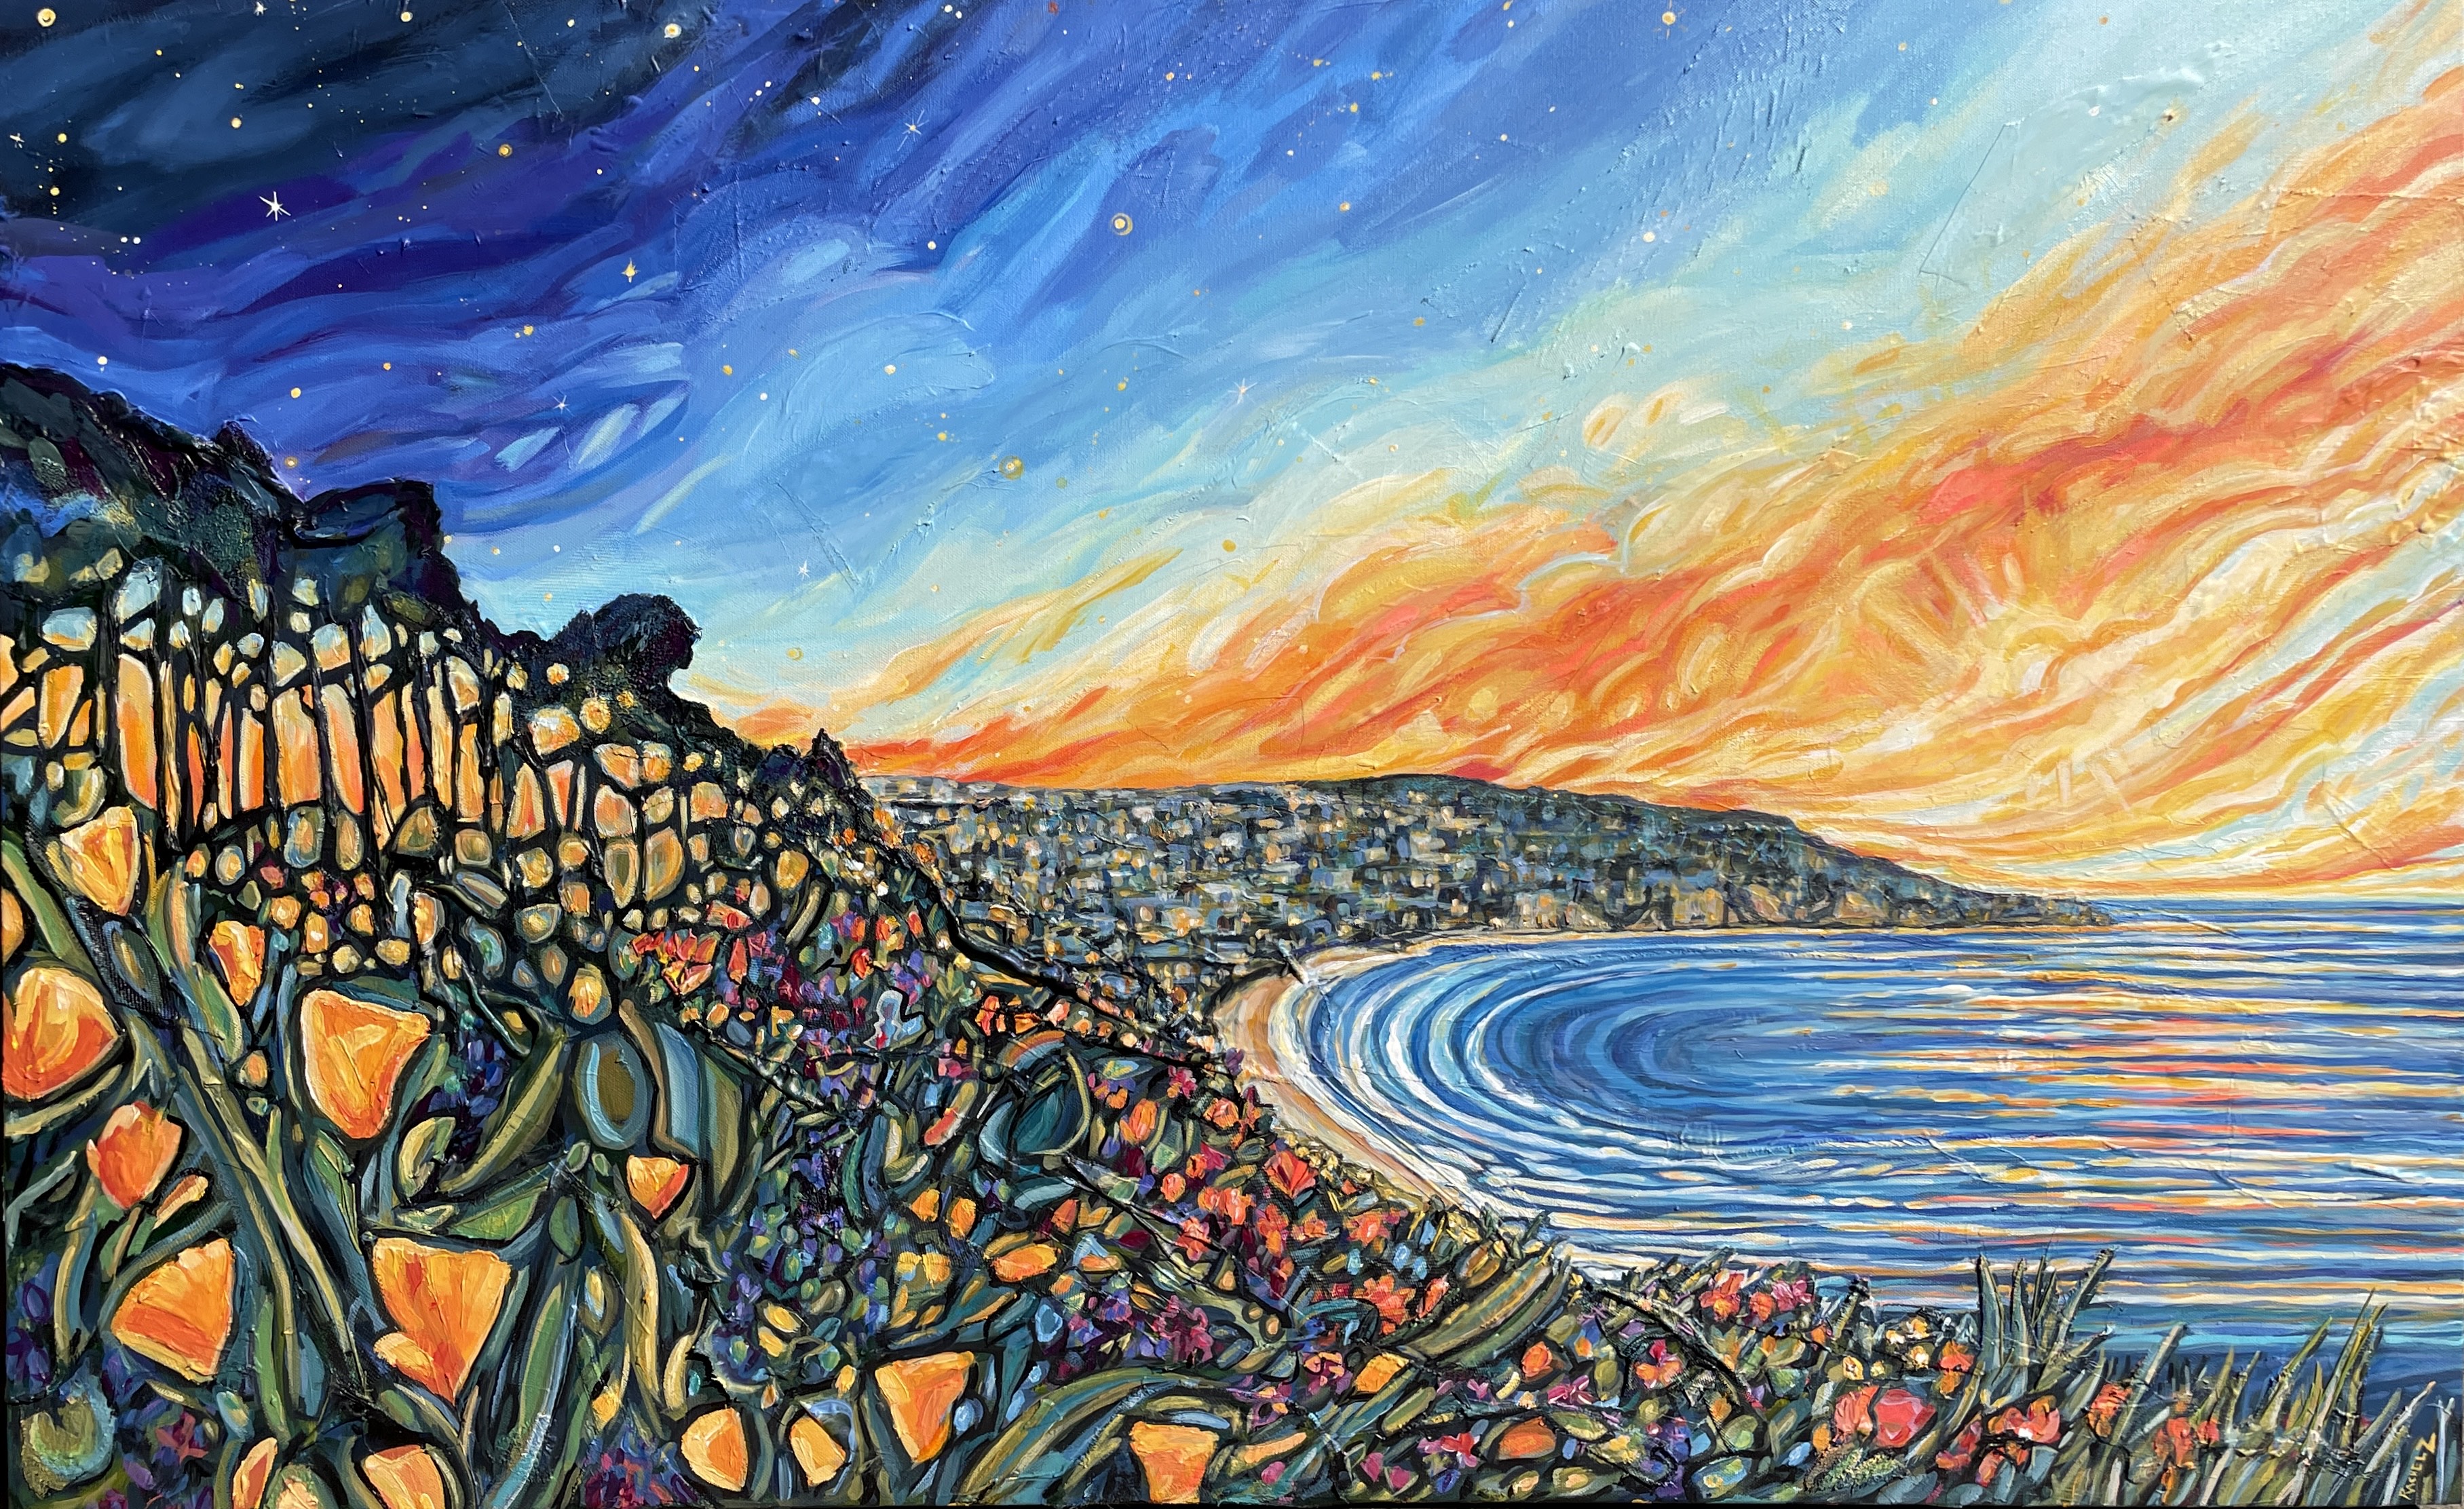 A painting depicts a poppy-covered hillside, a sky of blues and oranges and water reflecting the sun.